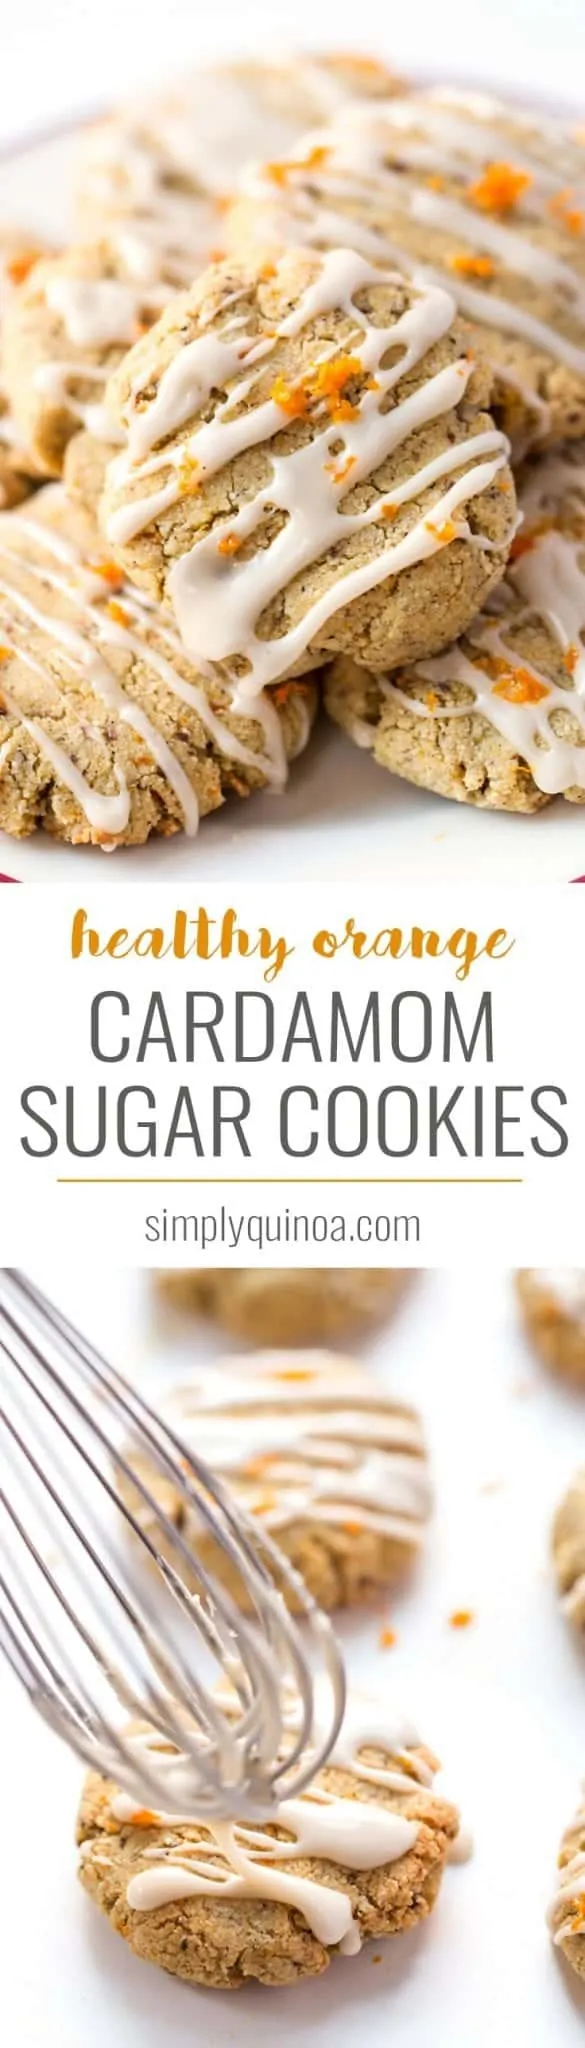 These Orange CARDAMOM Sugar Cookies are a fun twist on the classic recipe. Made with an almond flour base, they're healthy, flavorful, easy and delicious! [vegan + gluten-free]